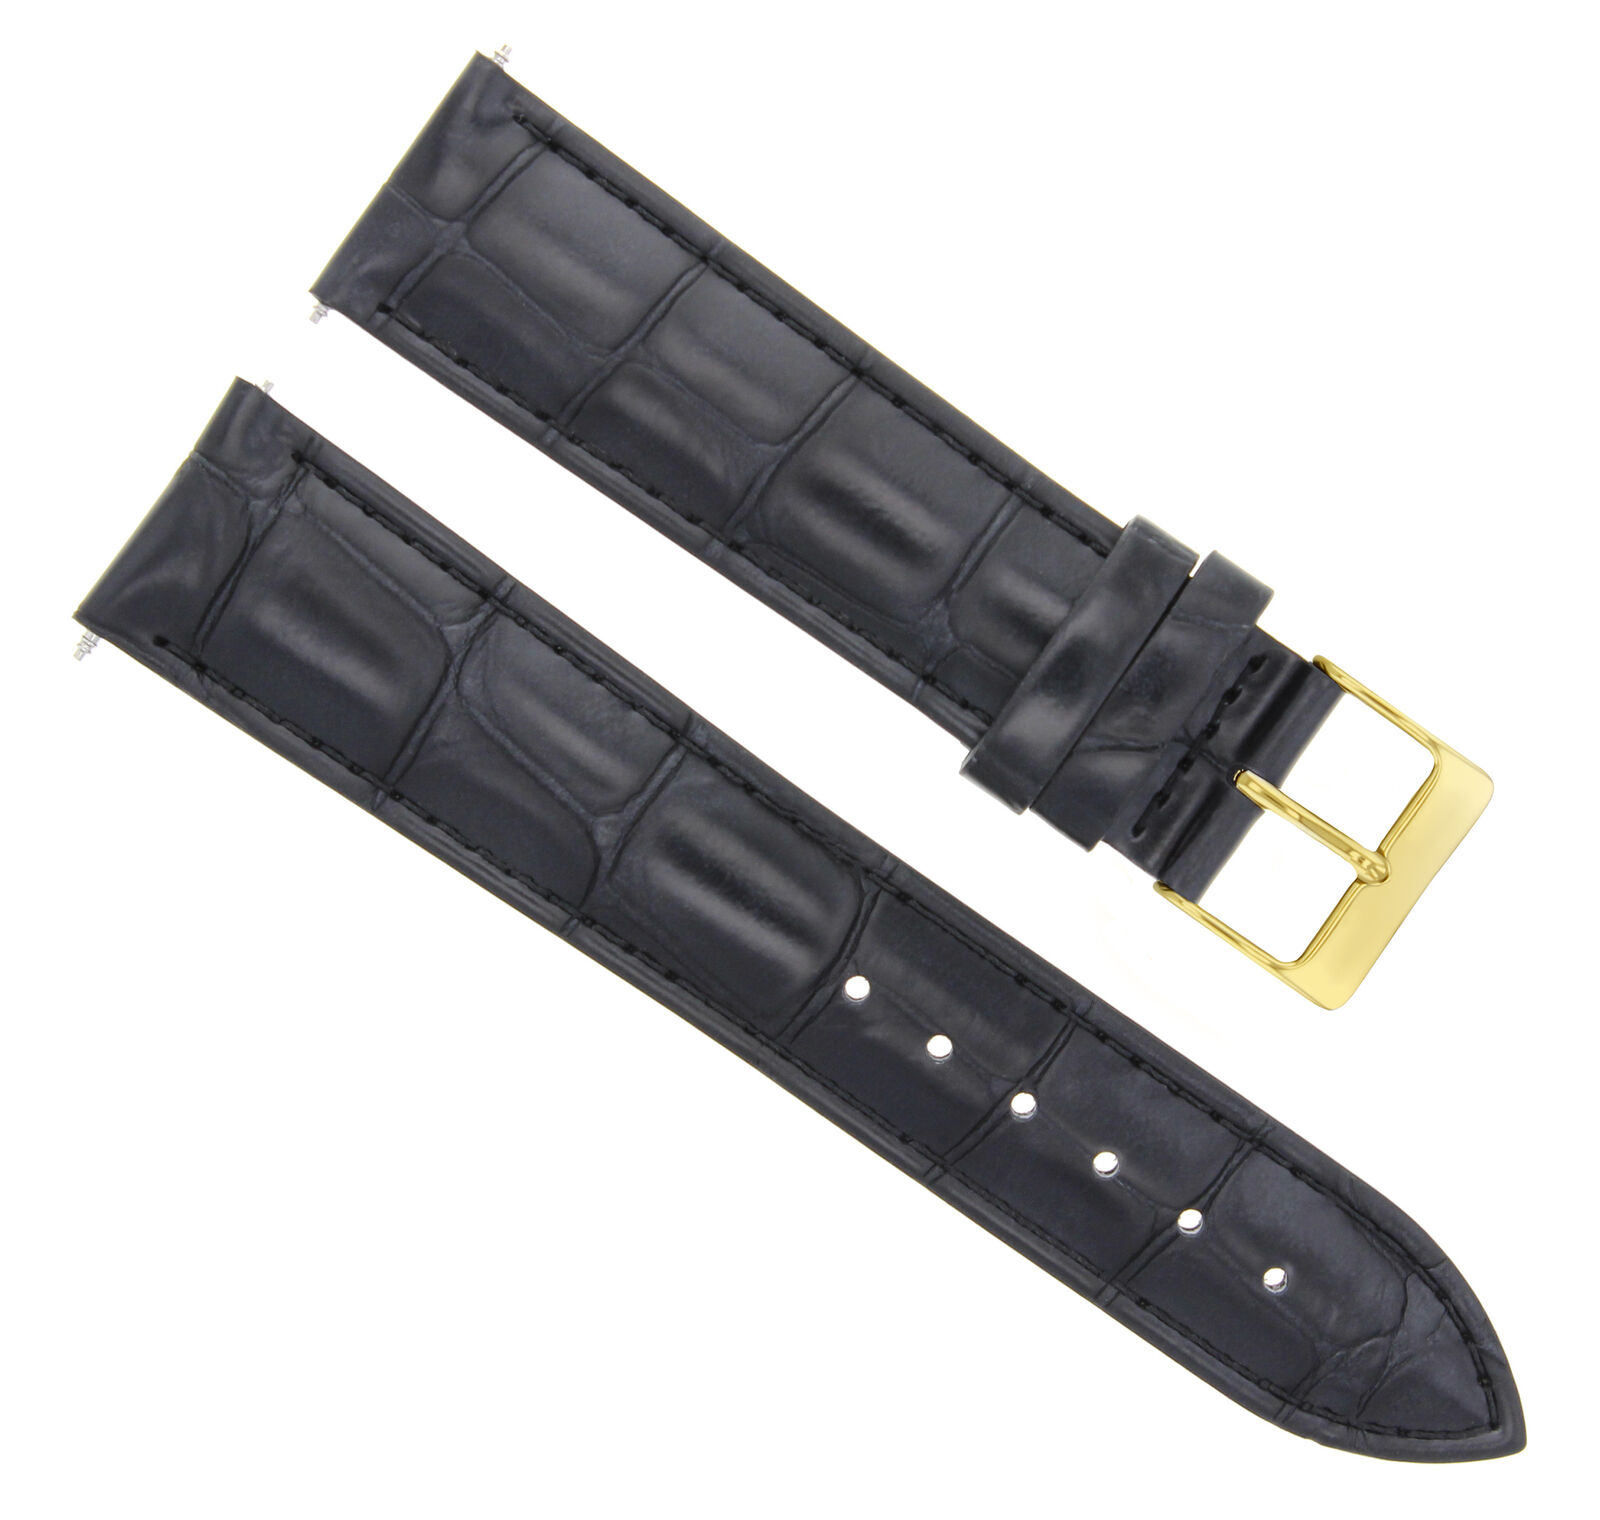 LEATHER WATCH BAND STRAP FOR JAEGER LECOULTRE WATCH 19/16MM BLACK GOLD BUCKLE